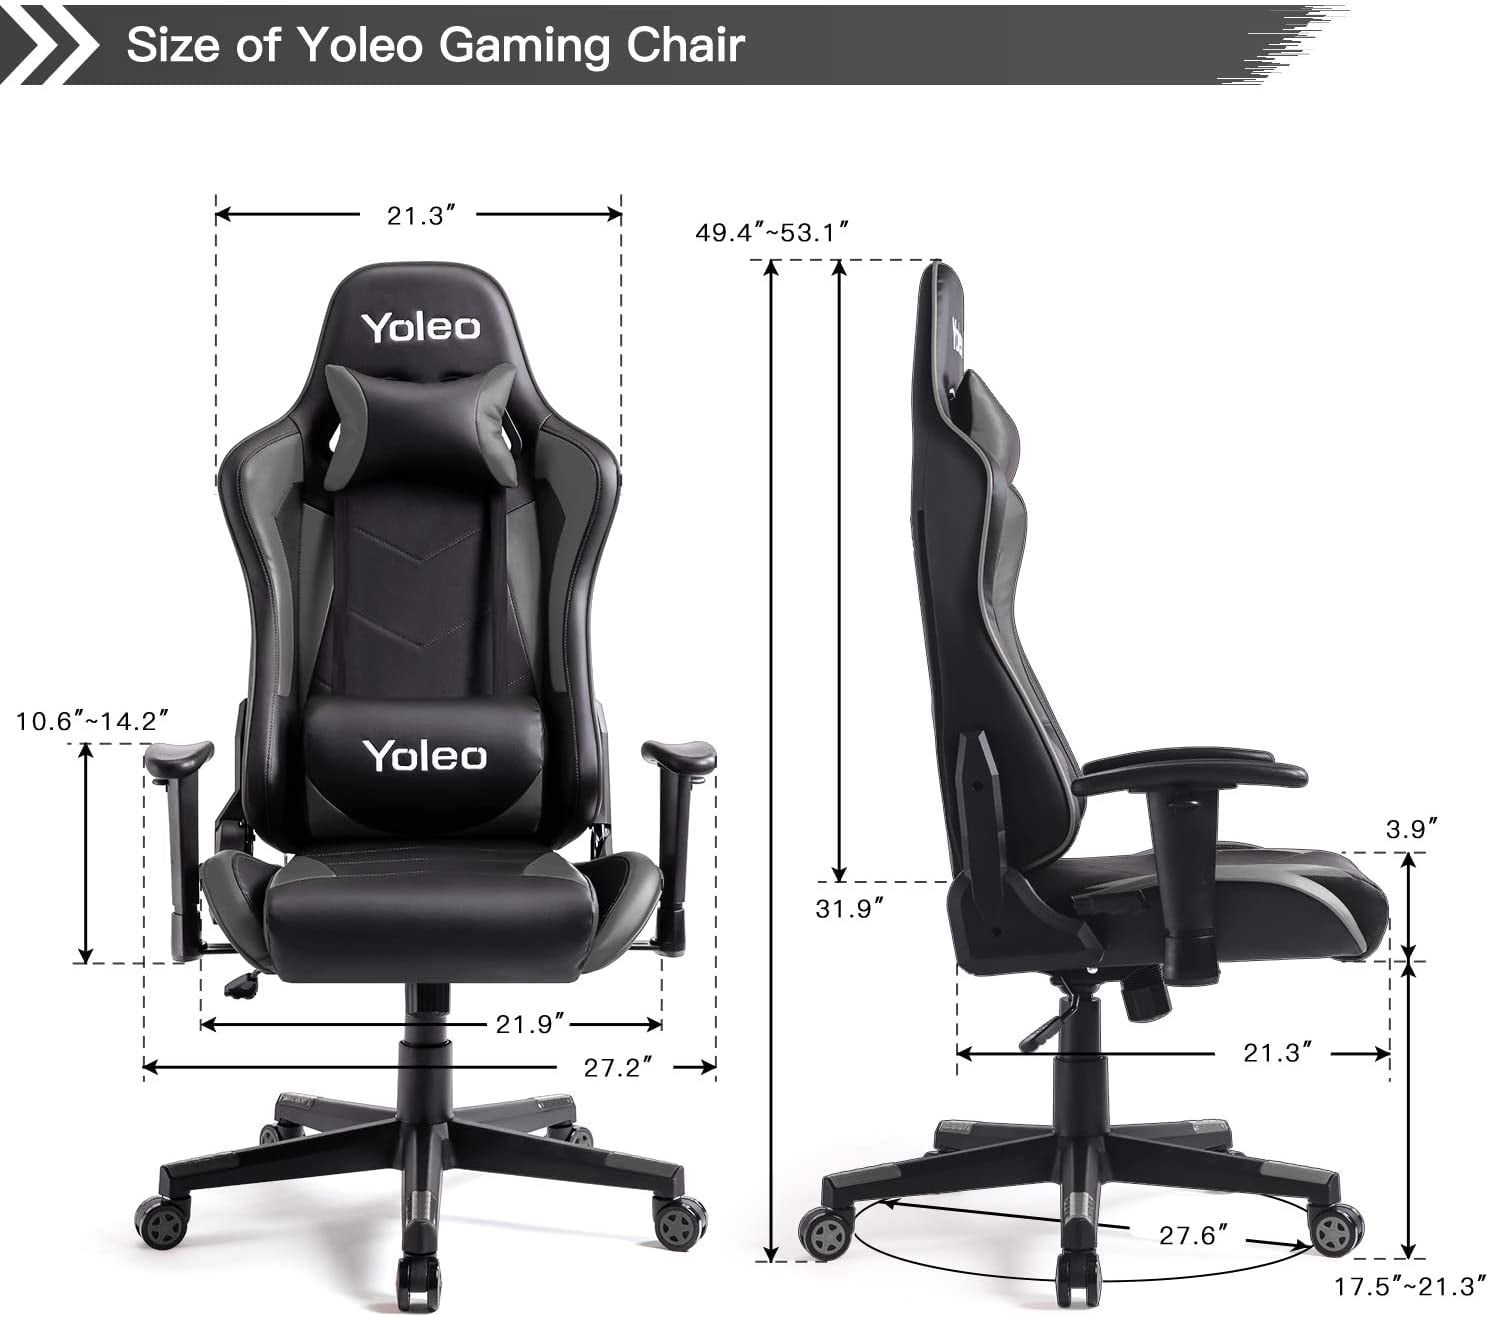 Yoleo Ergonomic Office Gamer Chair High Back Computer Gaming Chair Backrest & Seat Height Adjustment Black/Grey Executive Racing Swivel Desk Chair with Lumbar Support & Headrest Gaming Chair 